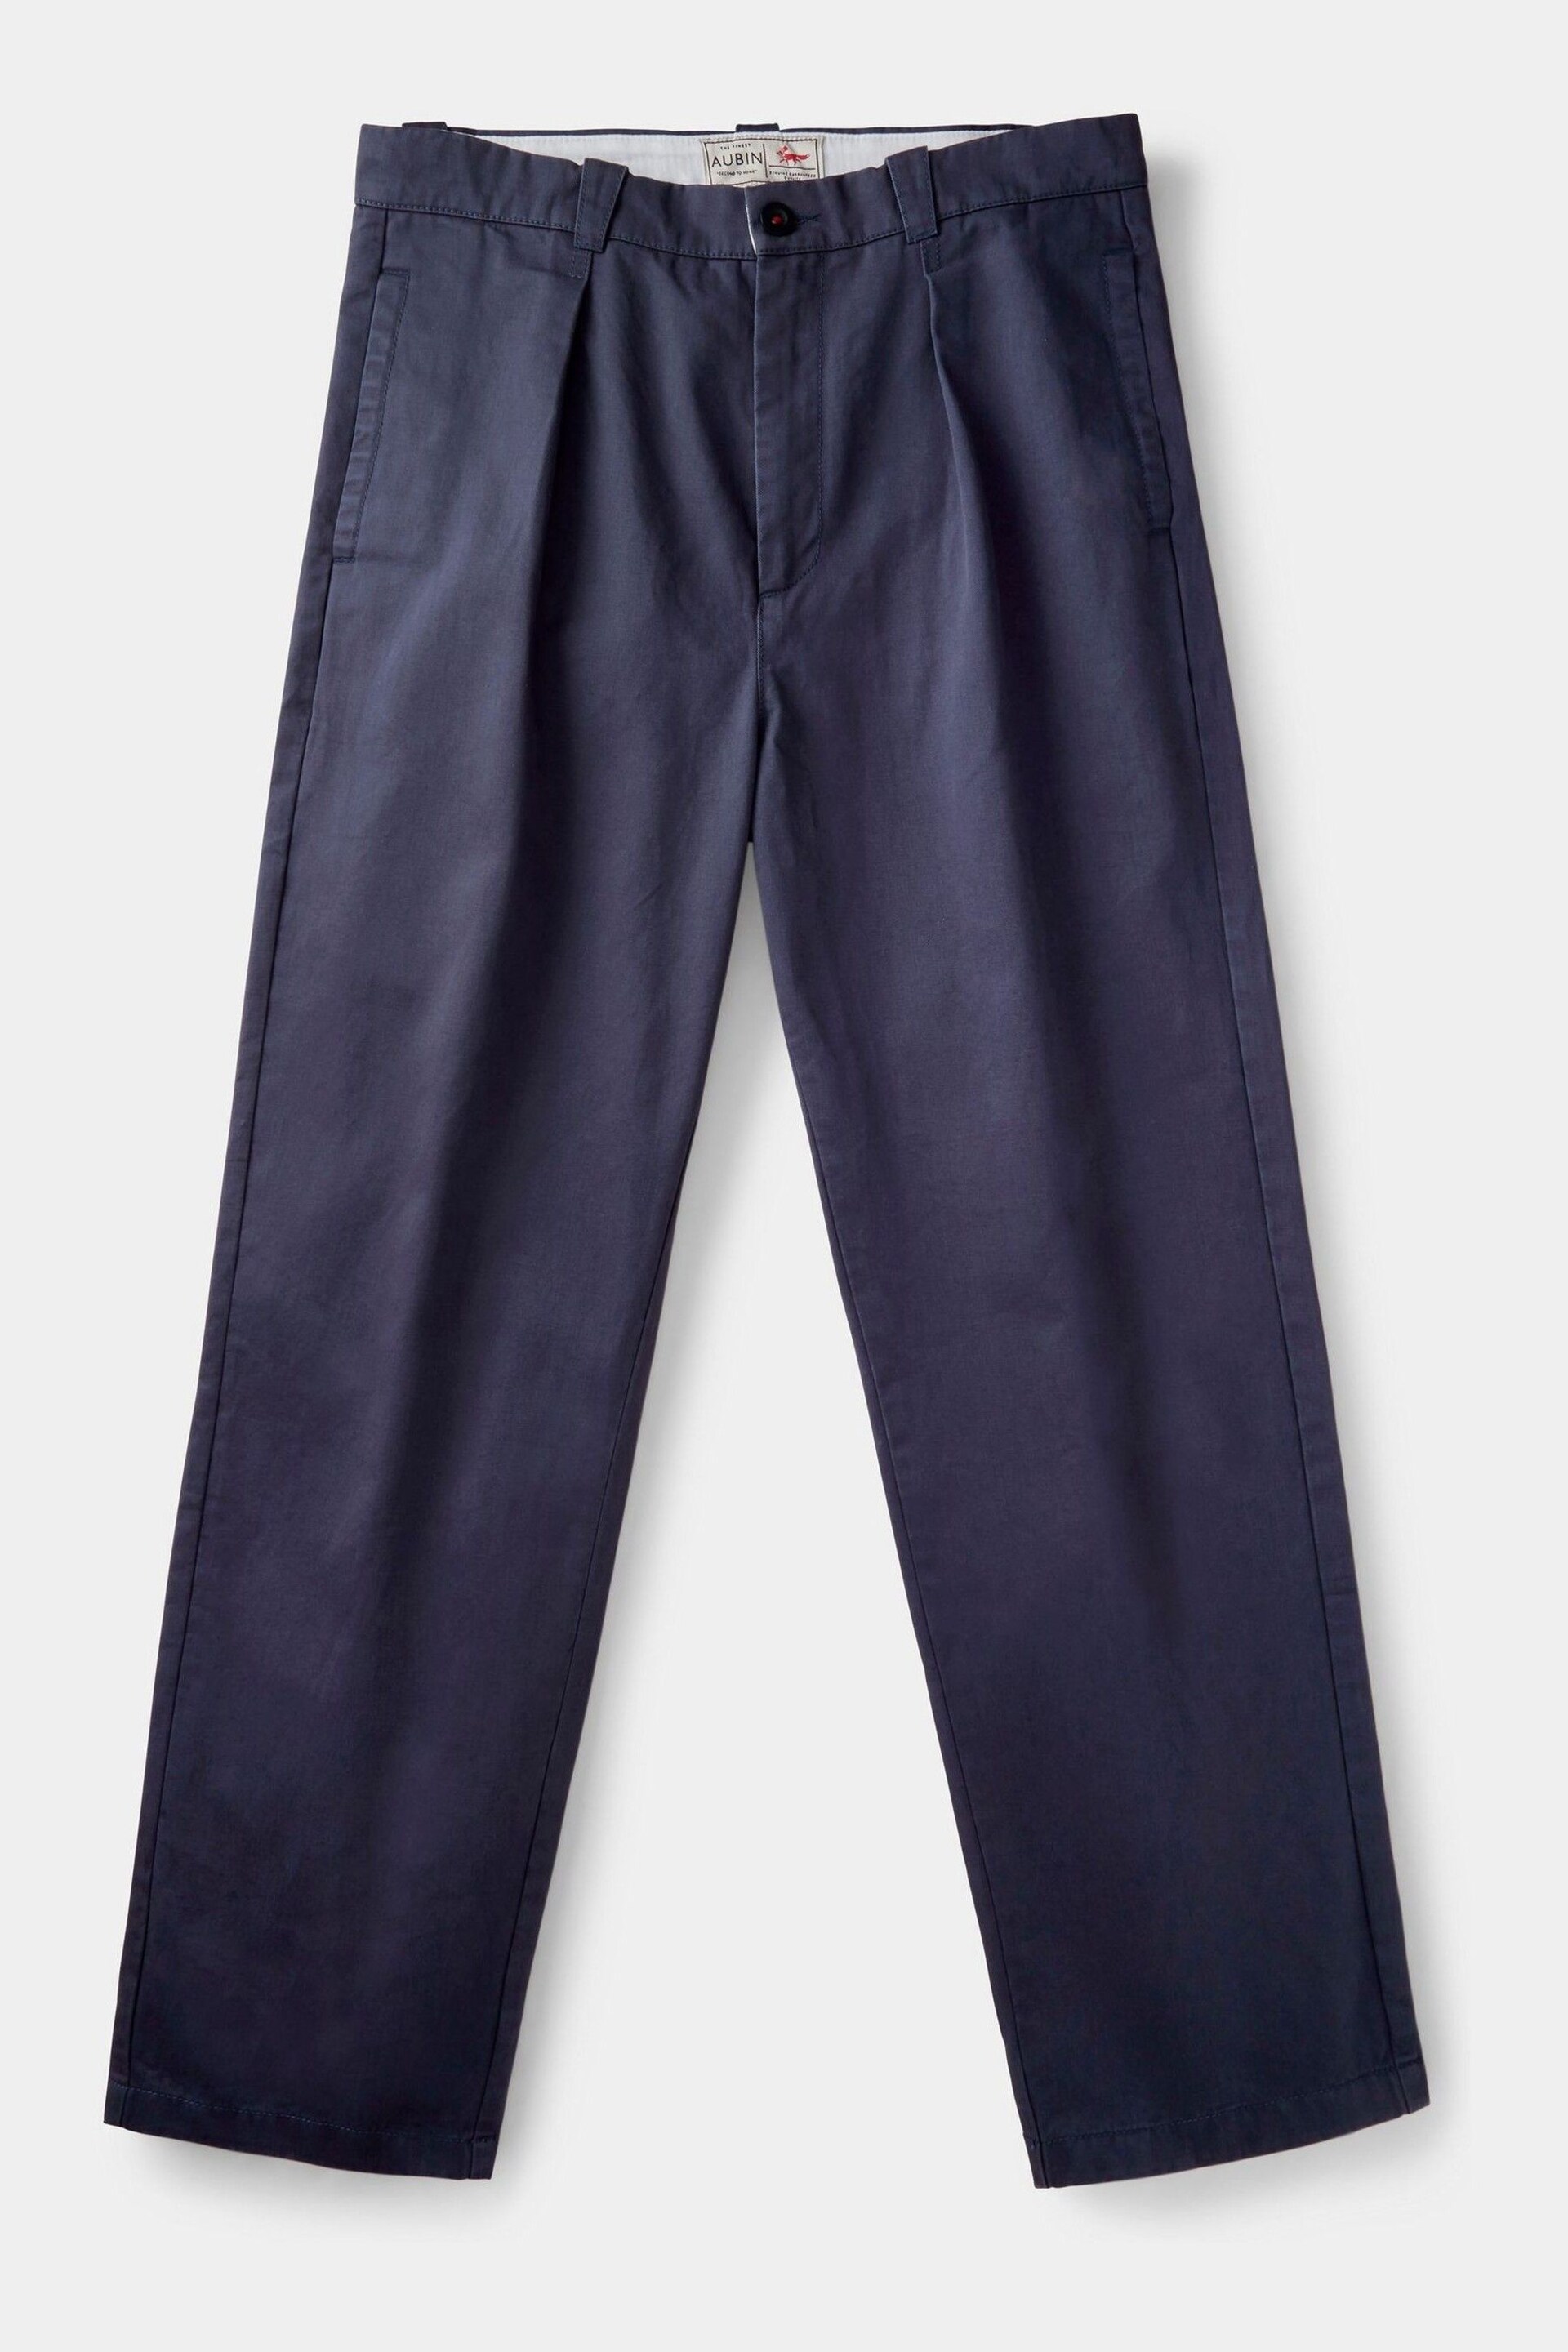 Aubin Barcombe Twill Trousers - Image 6 of 7